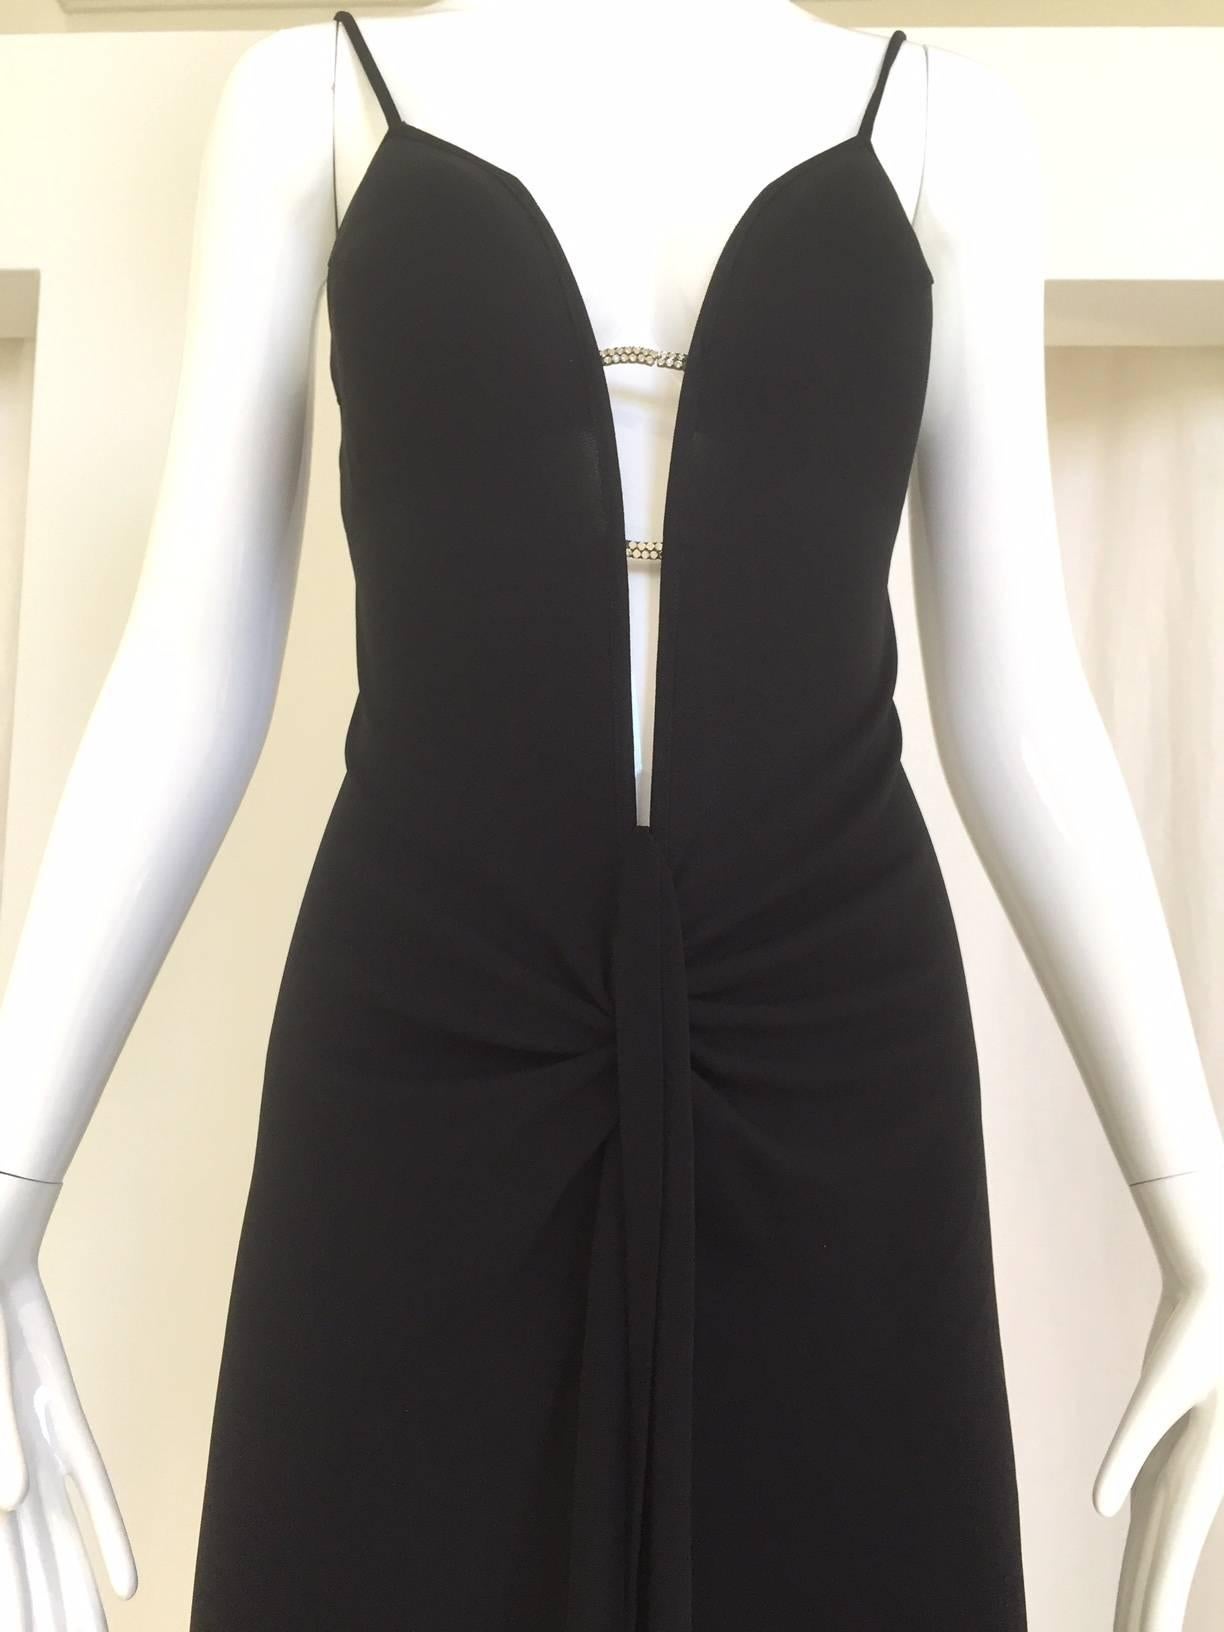  1990s La Perla Black V neck Jersey Cocktail Dress In Good Condition For Sale In Beverly Hills, CA